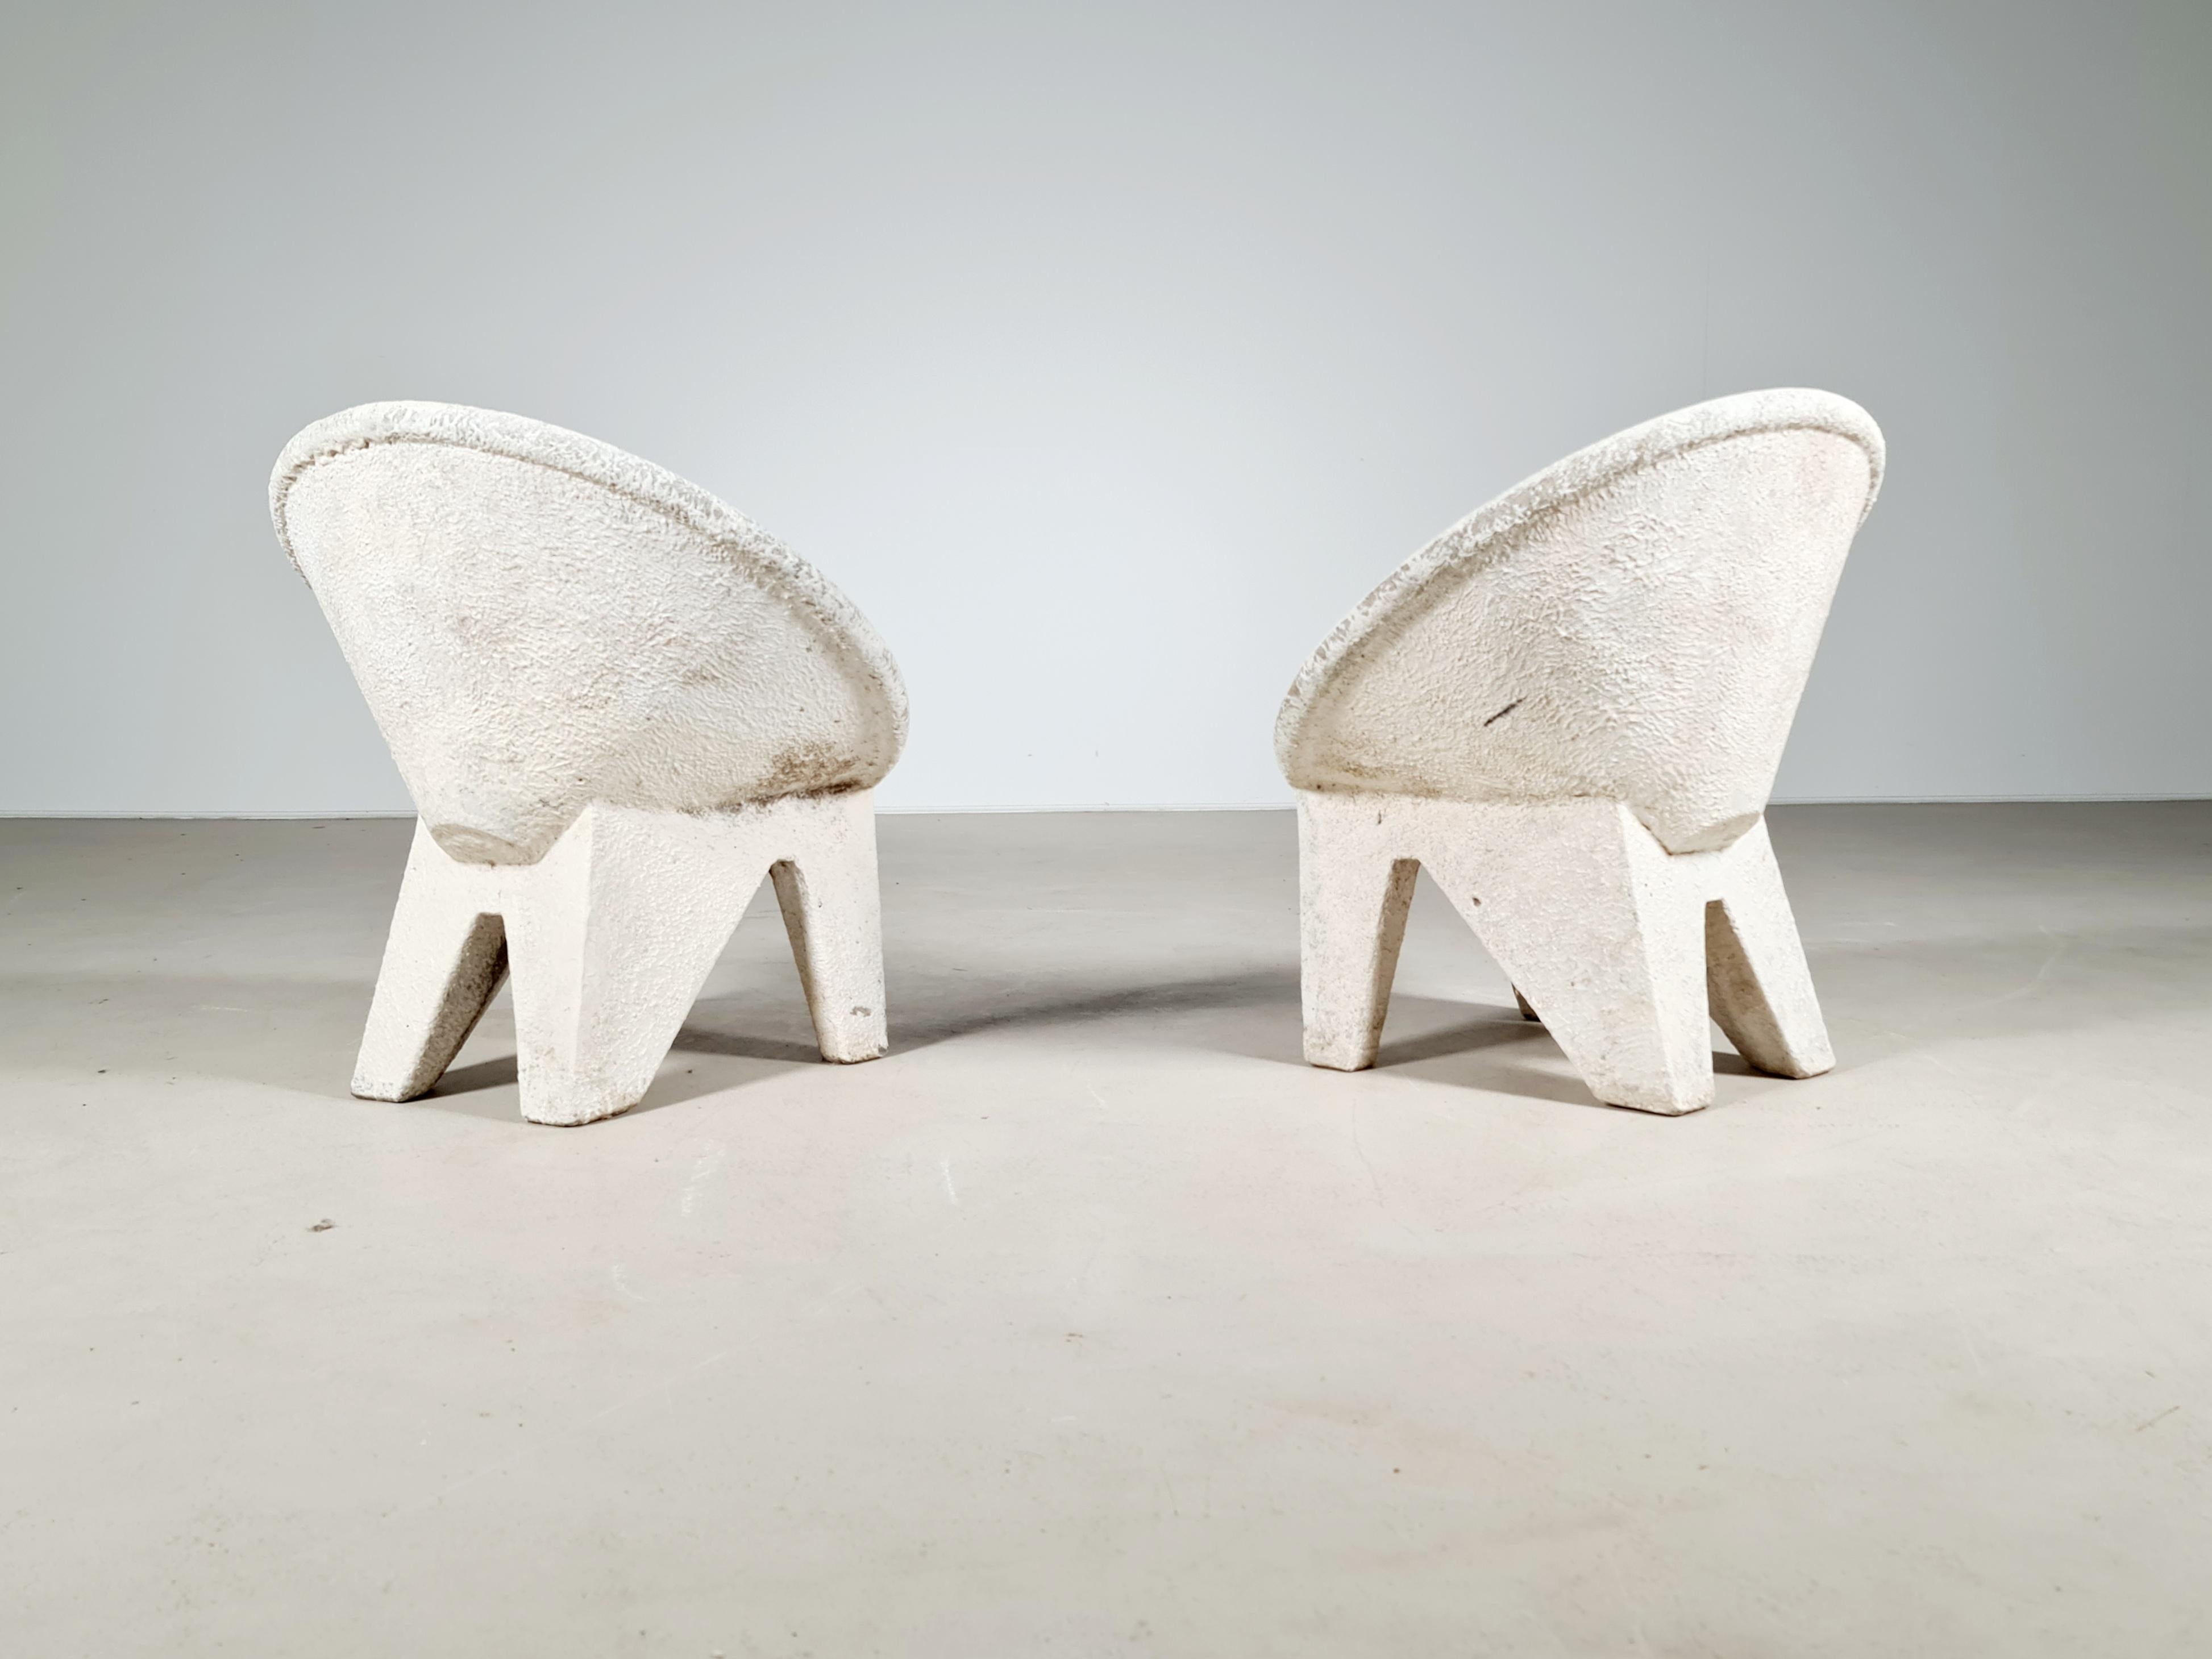 Set of 2 concrete chairs for outdoor use. Perfect for gardens, terraces and balconies. Very decorative objects.